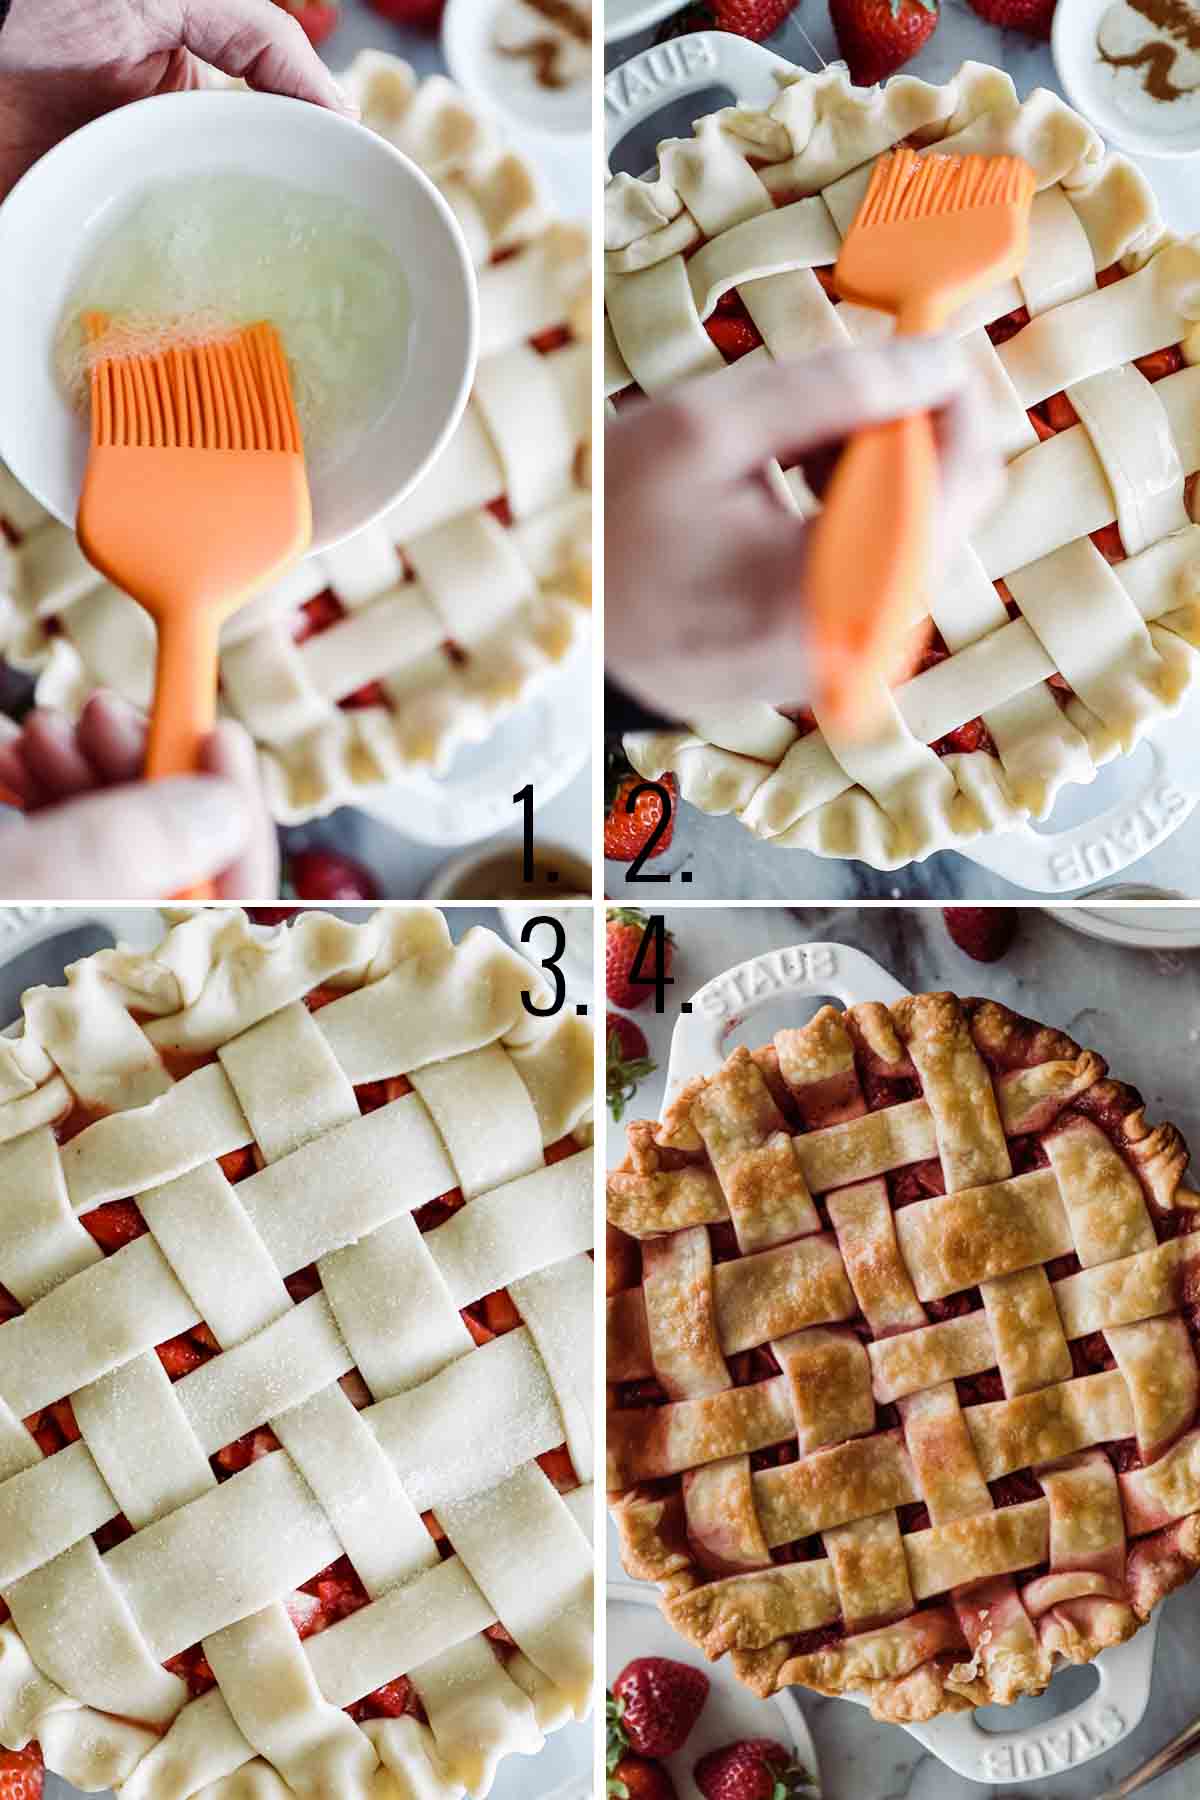 Orange brush brushing egg wash on the top of the pie and sprinkling sugar on top. 